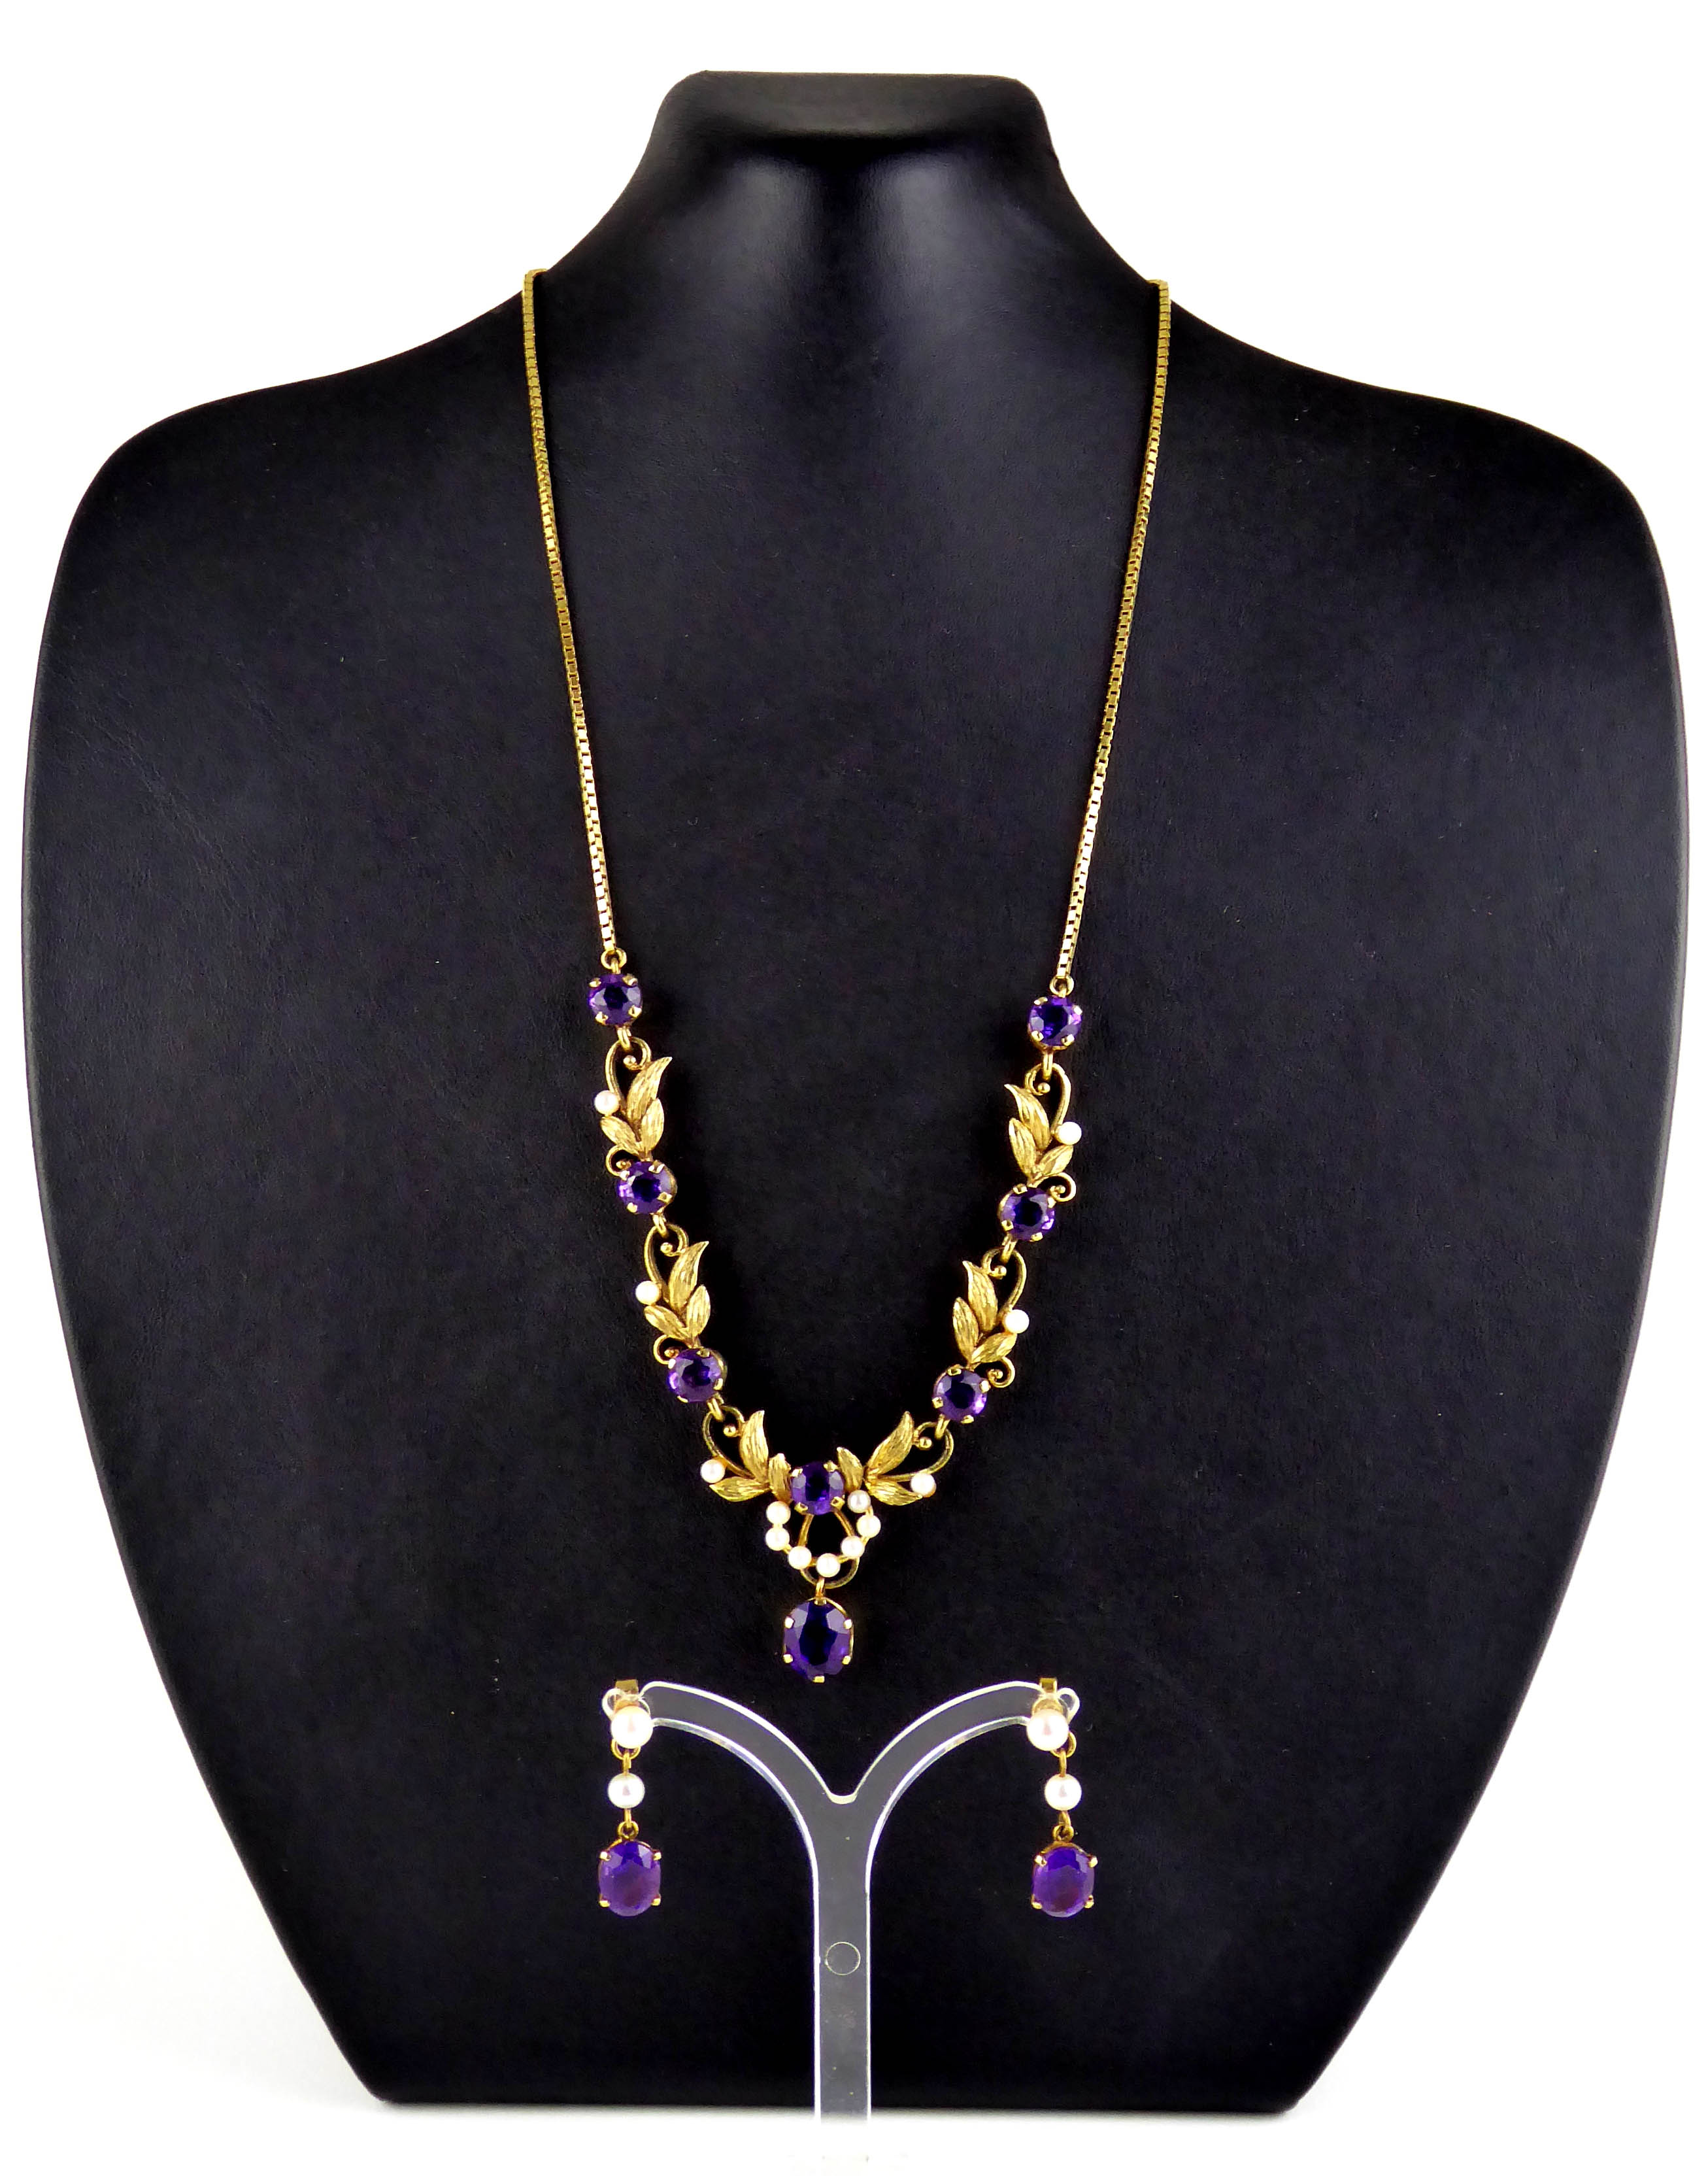 A 20TH CENTURY 9CT GOLD, AMETHYST AND SEED PEARL NECKLACE AND EARRING SET Having an arrangement of - Image 2 of 2